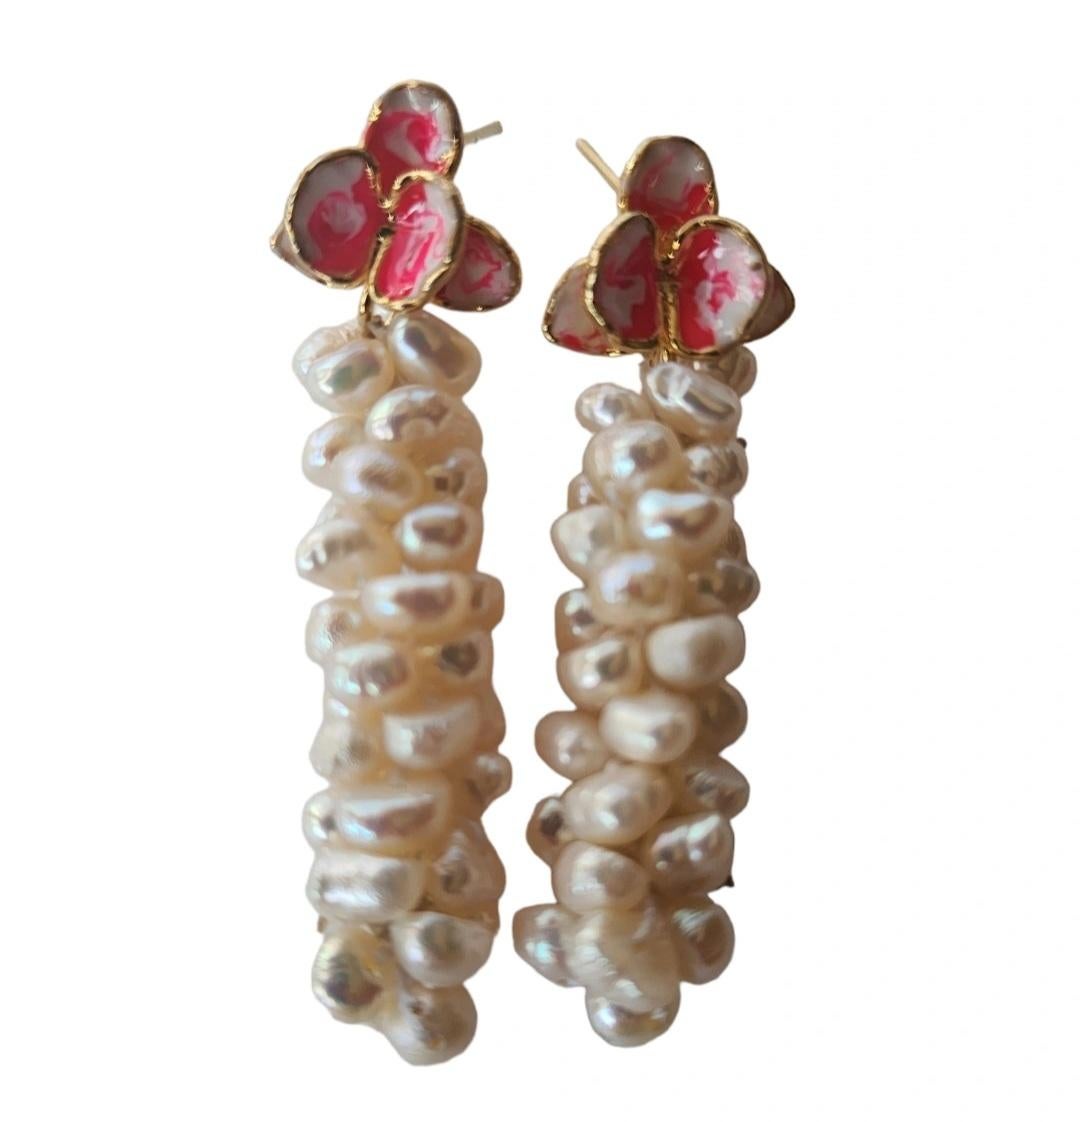 Ngg Jewelz 
Fleur Magnifique Collection
Wild Orchid Pearl Earrings 

Orchids are primarily symbols of beauty and good taste. They are also symbols of wealth, power, respect and admiration.

The famed Chinese philosopher, Confucius, is known to have